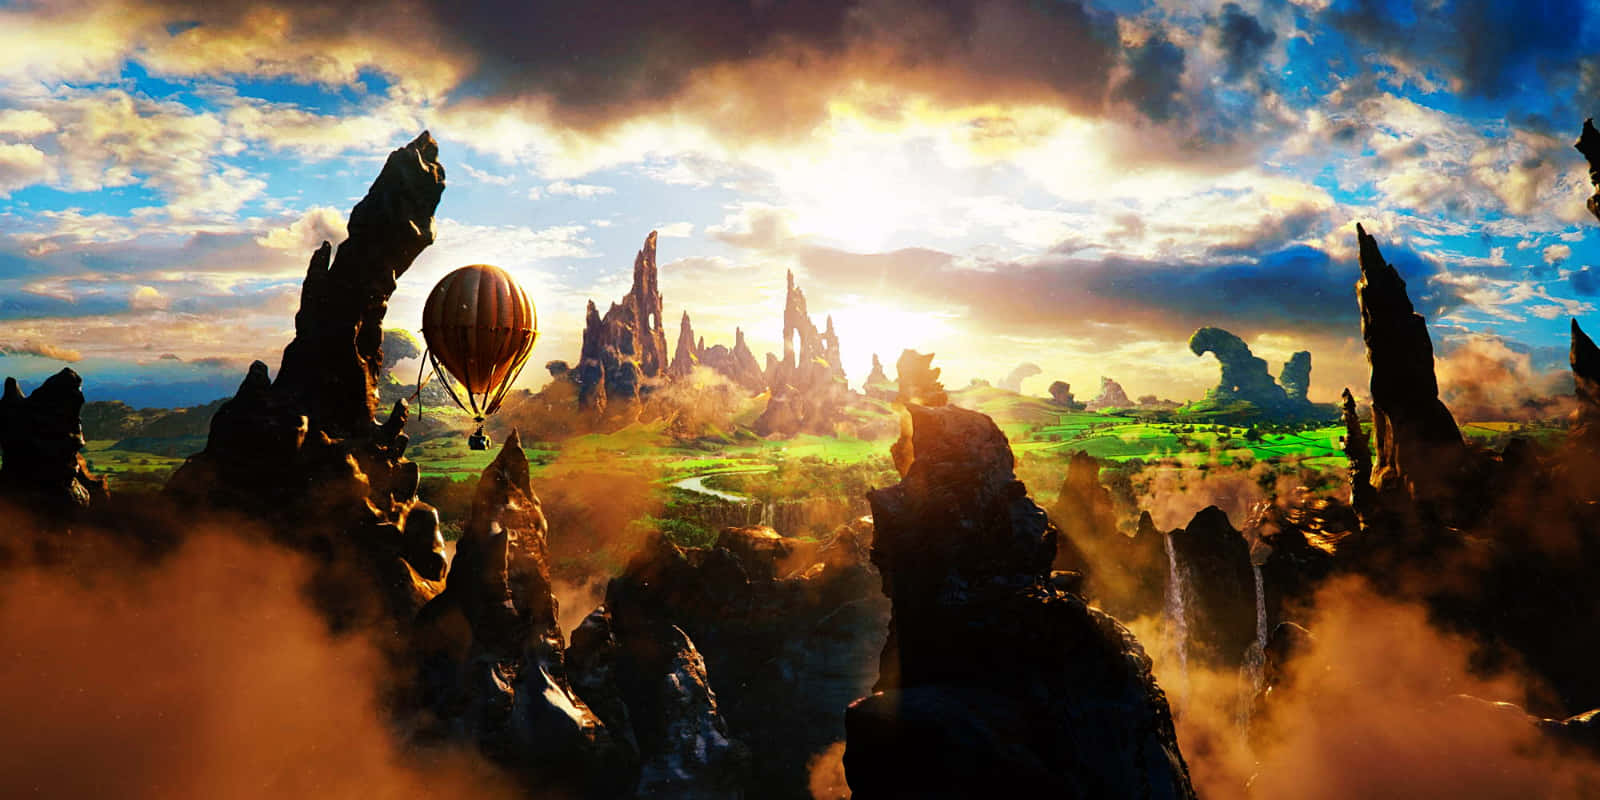 Tremendous Scene From Oz The Great And Powerful Wallpaper